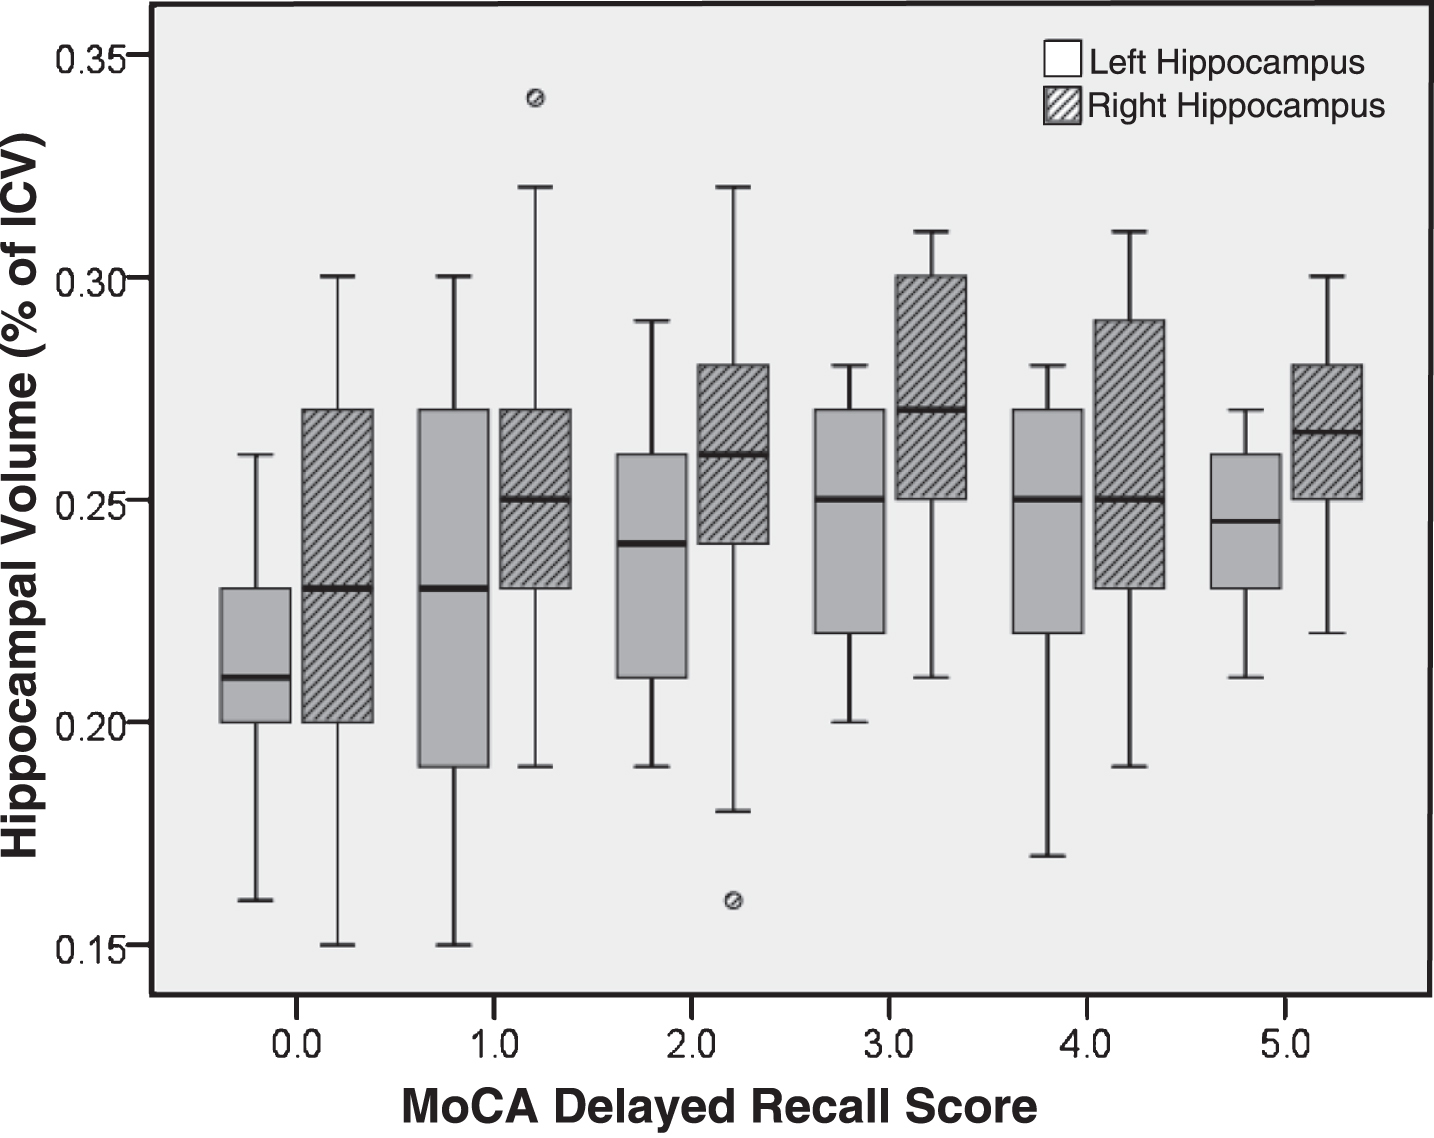 Hippocampal volume (as a percentage of intracranial volume) by MoCA delayed recall score.